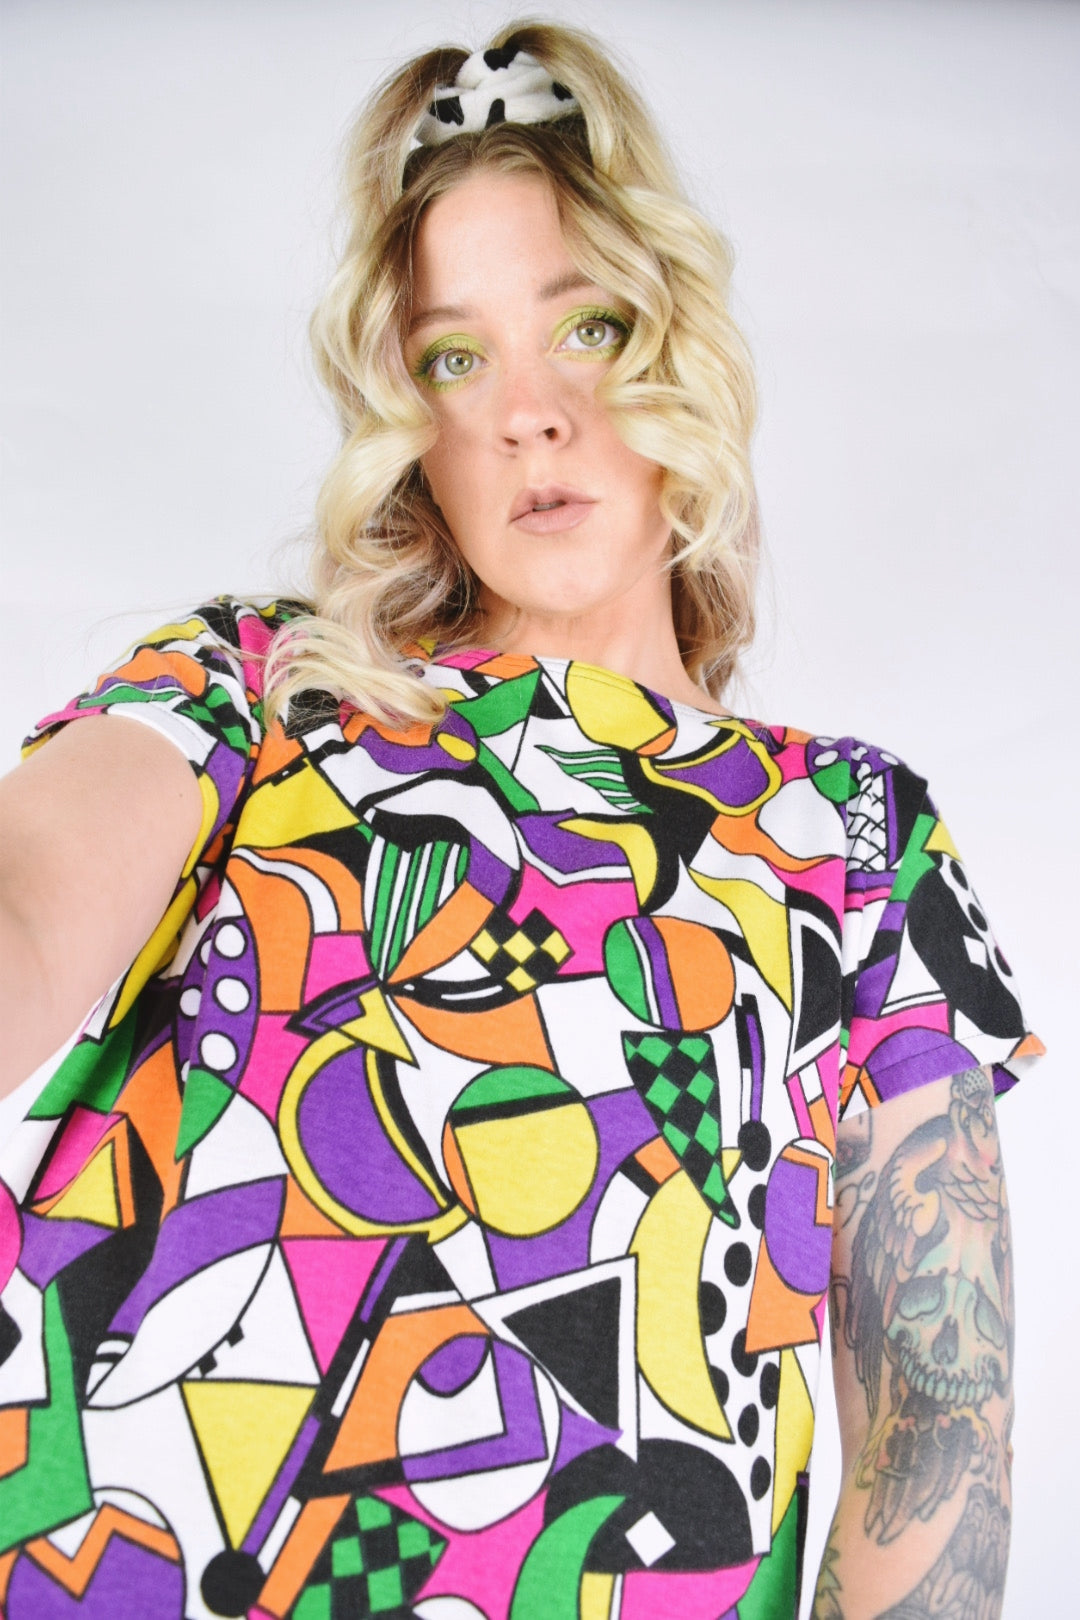 80s TRIPPY RAINBOW CHECKERBOARD BLOUSE - XS-M